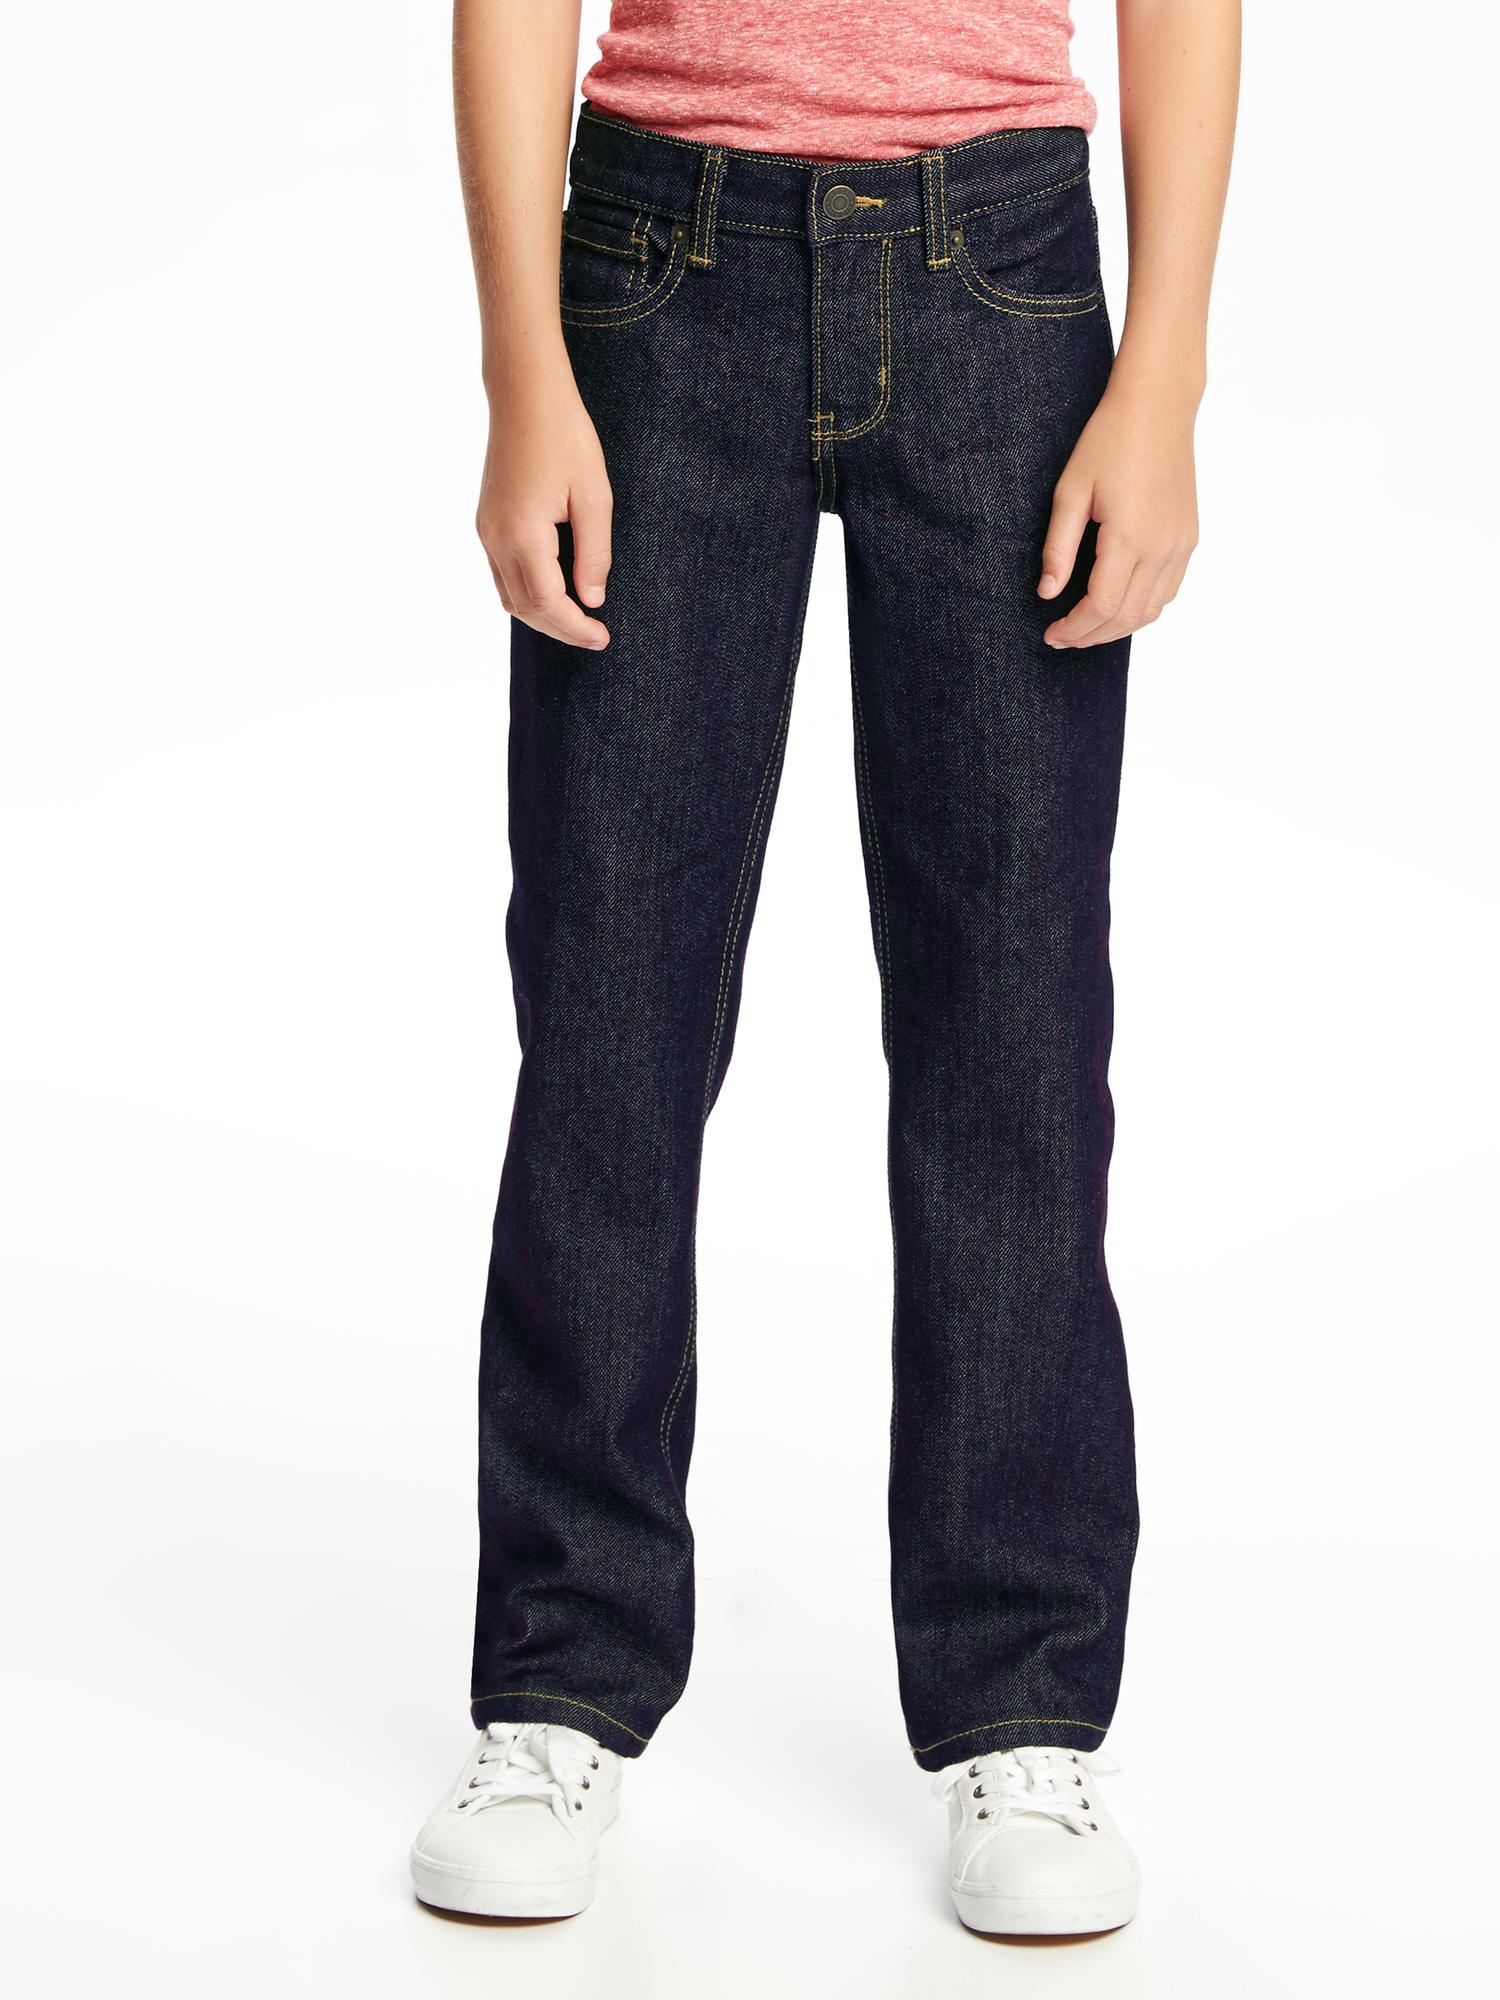 Straight-Leg Jeans for Boys | Old Navy